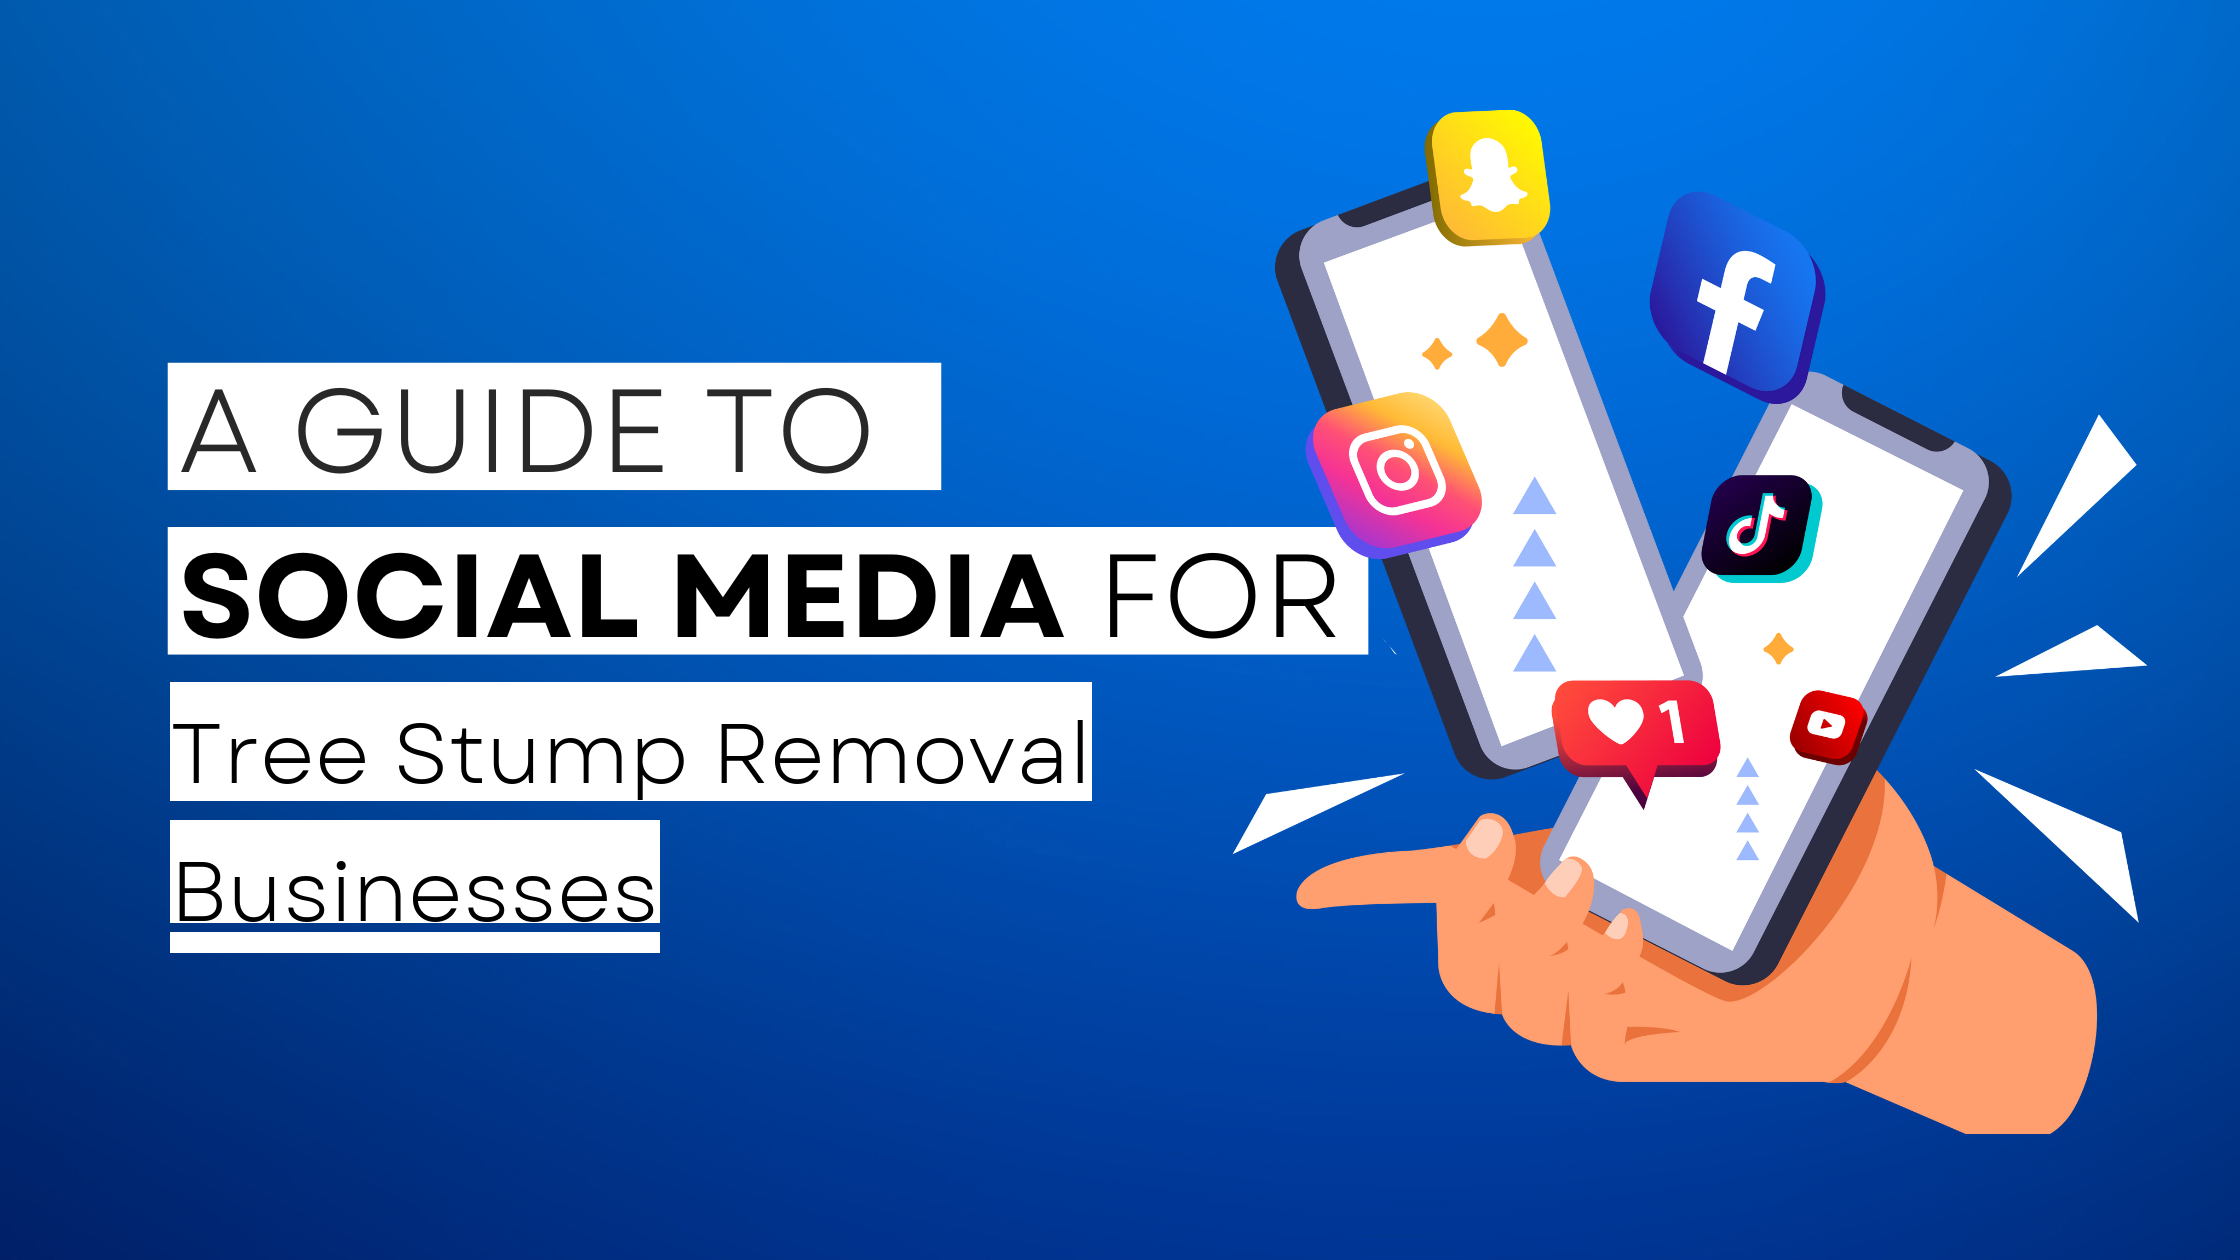 How to start Tree Stump Removal  on social media